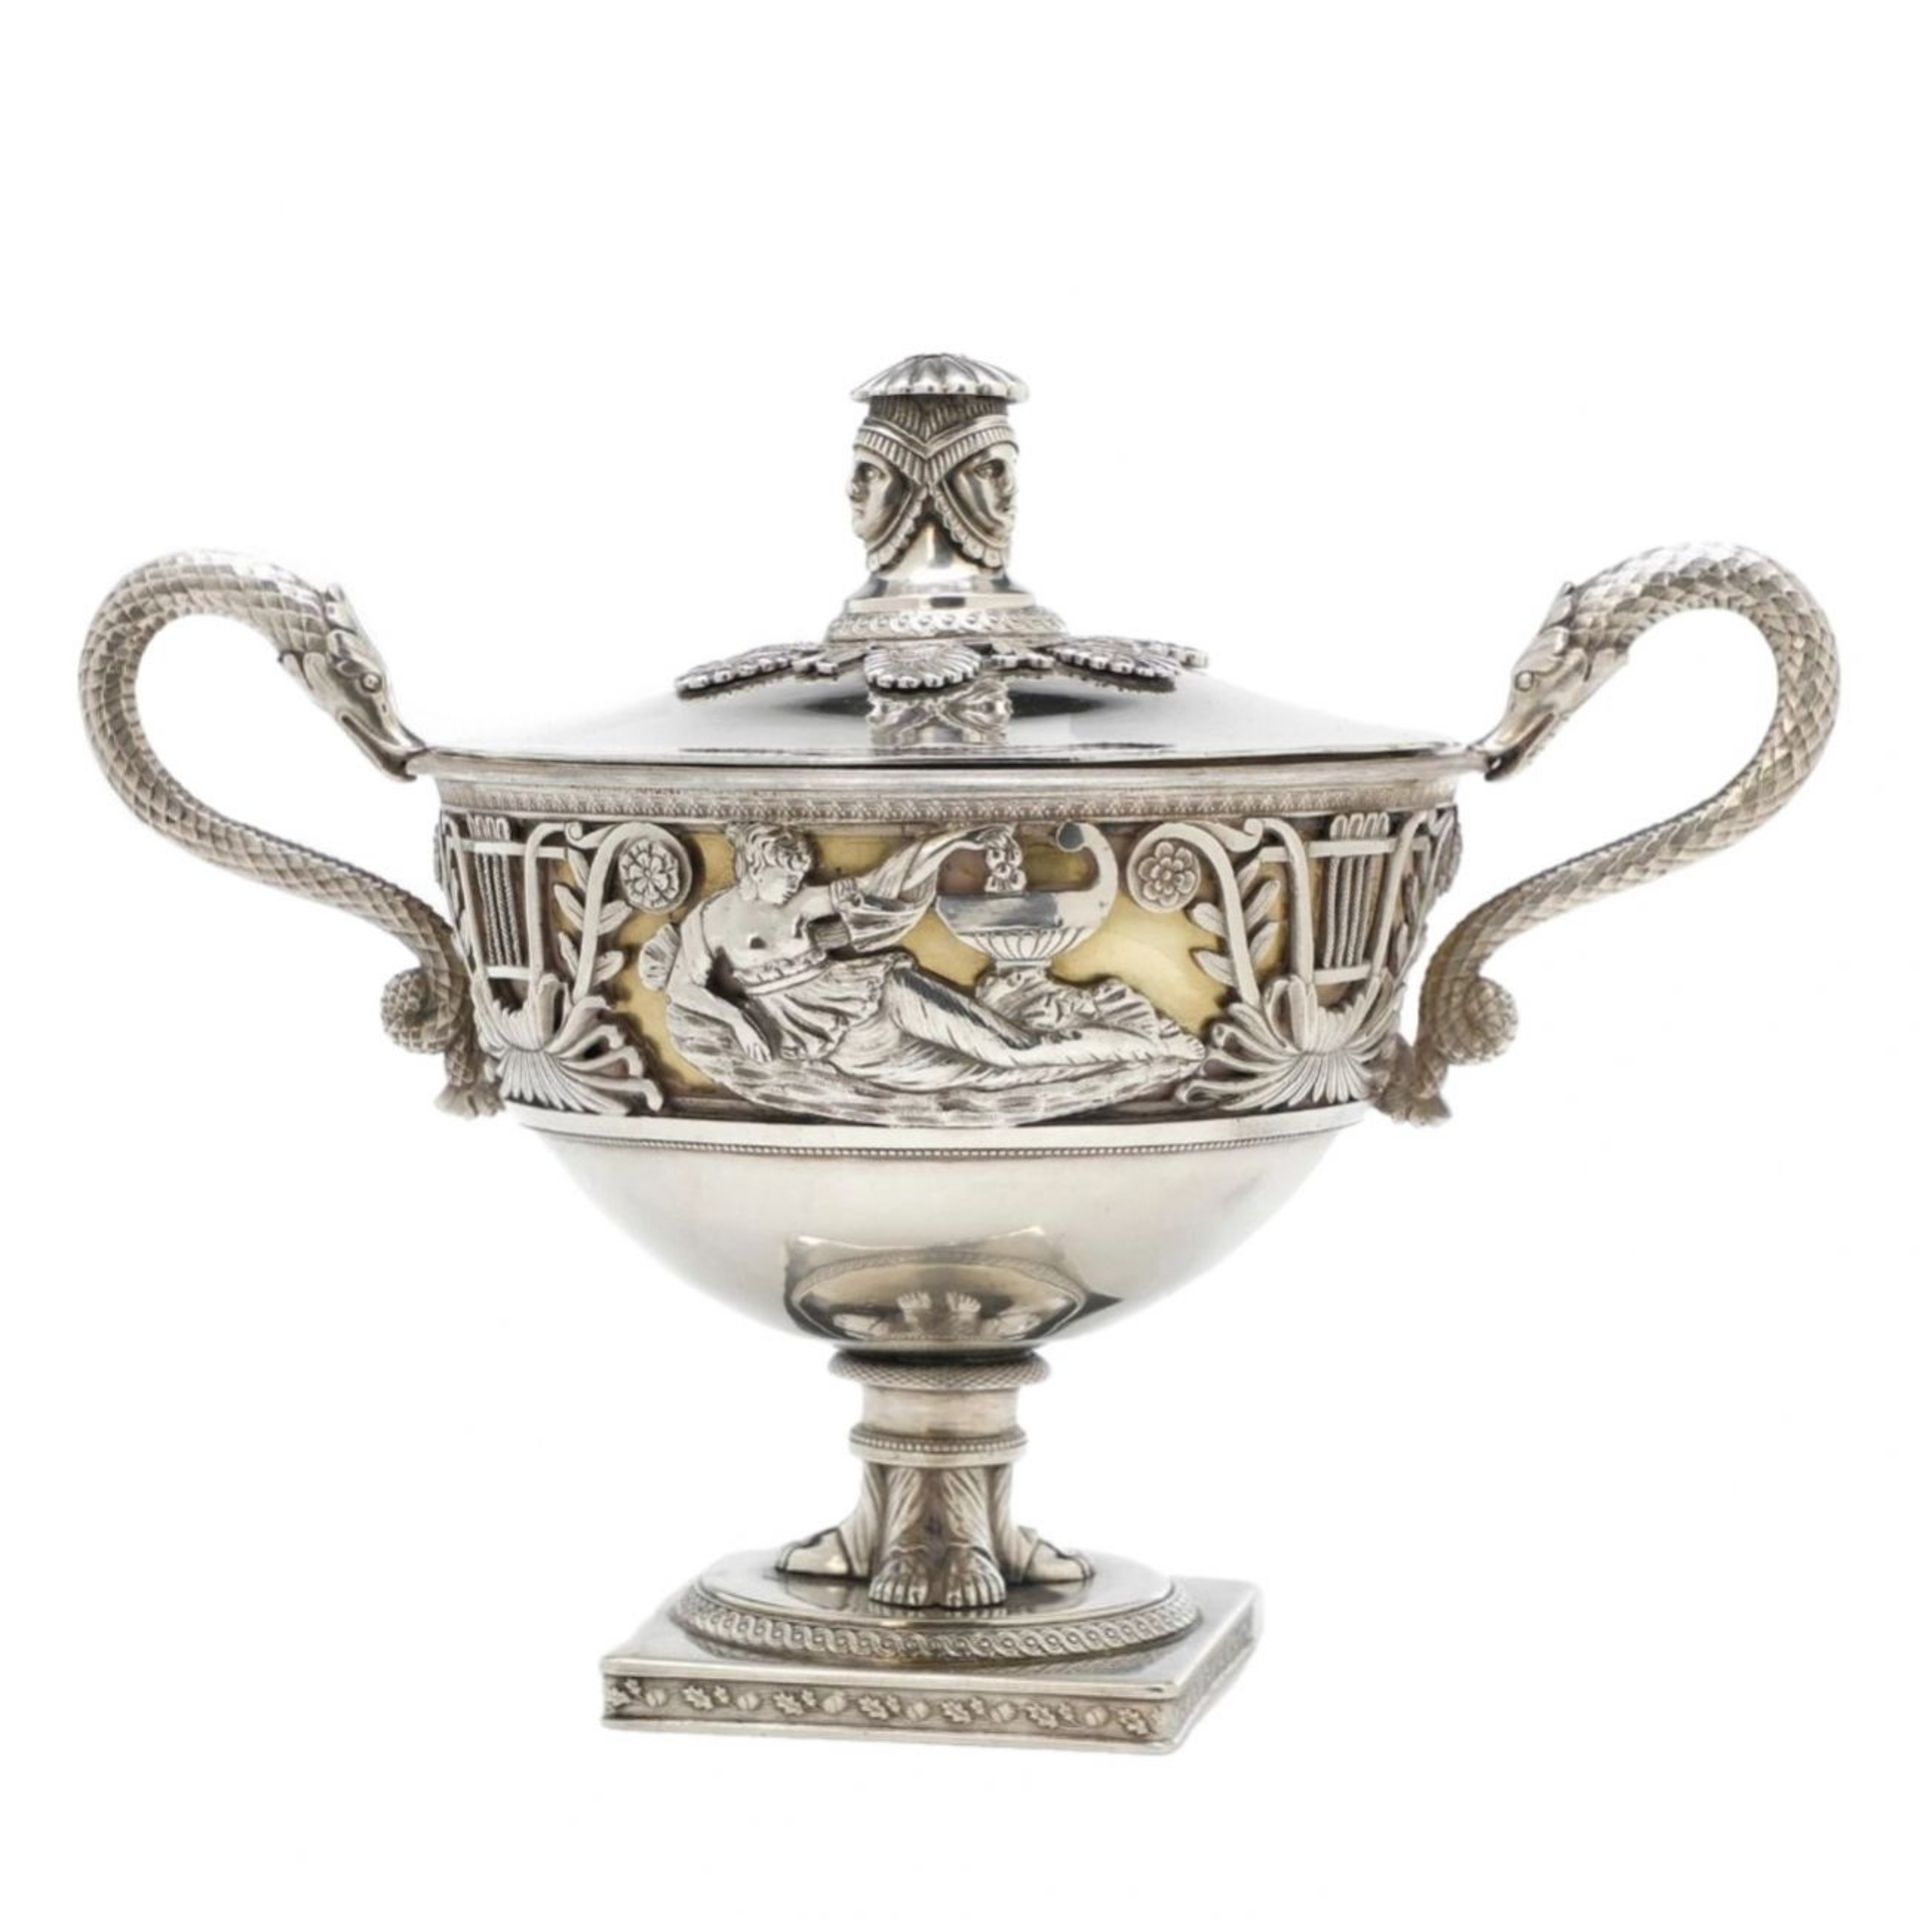 Silver bonbonniere. Russian Empire, St. Petersburg, workshop Axel Hedlund. Turn of the 1819th centur